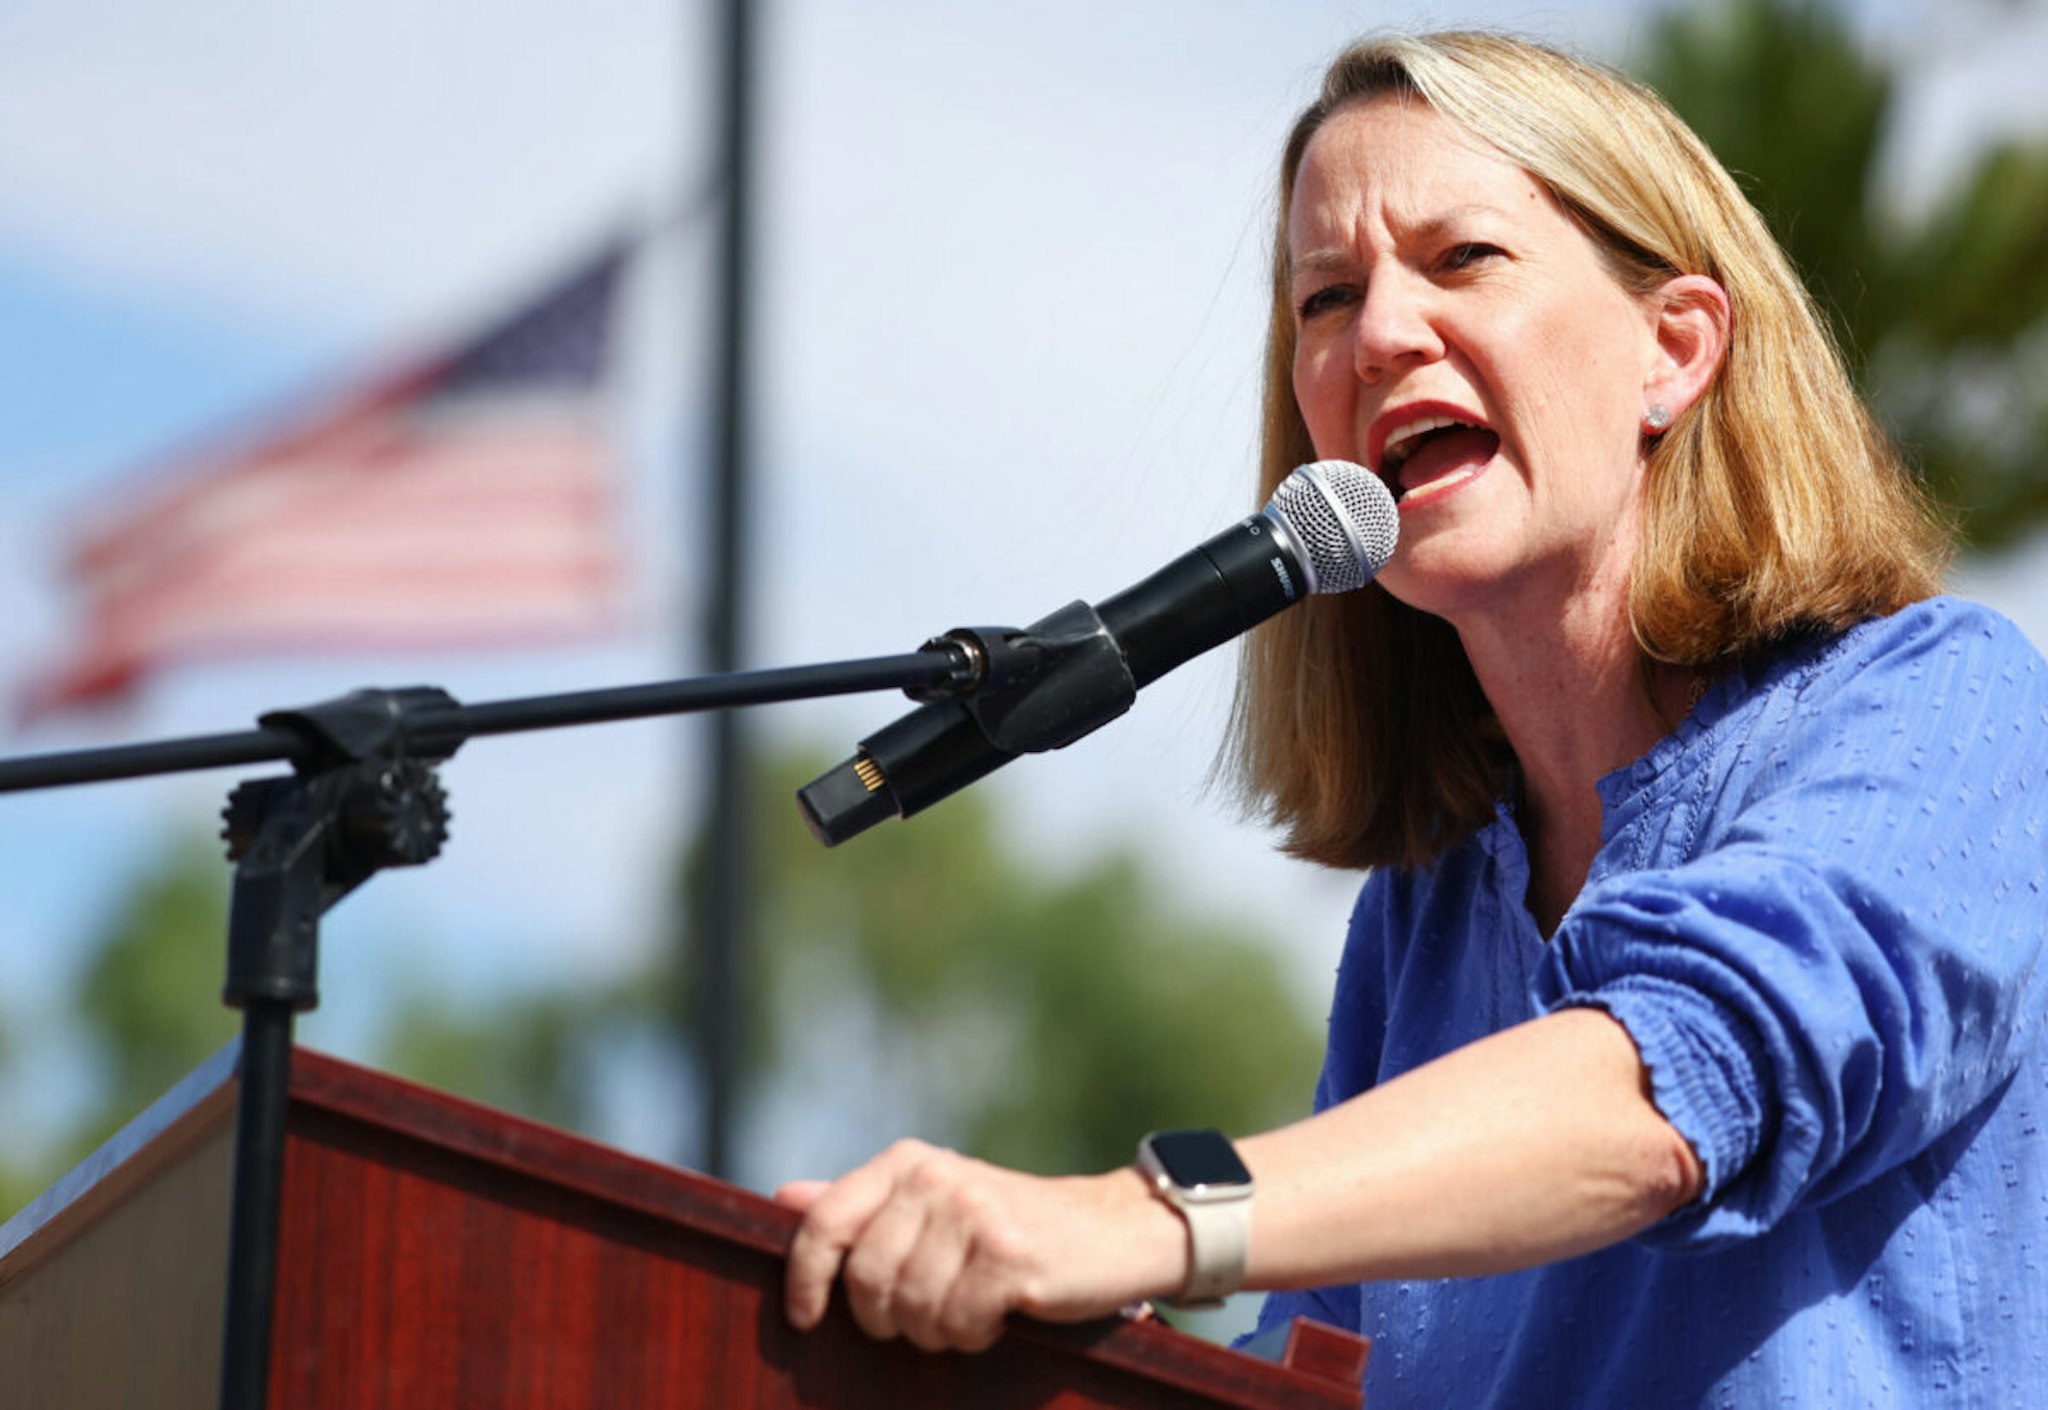 PHOENIX, ARIZONA - OCTOBER 08: Kris Mayes, Democratic candidate for Arizona Attorney General, speaks at a Women's March rally in support of midterm election candidates who support abortion rights outside the State Capitol on October 8, 2022 in Phoenix, Arizona. Mayes faces Trump-endorsed Arizona Republican nominee for attorney general Abe Hamadeh in the midterm elections on November 8.